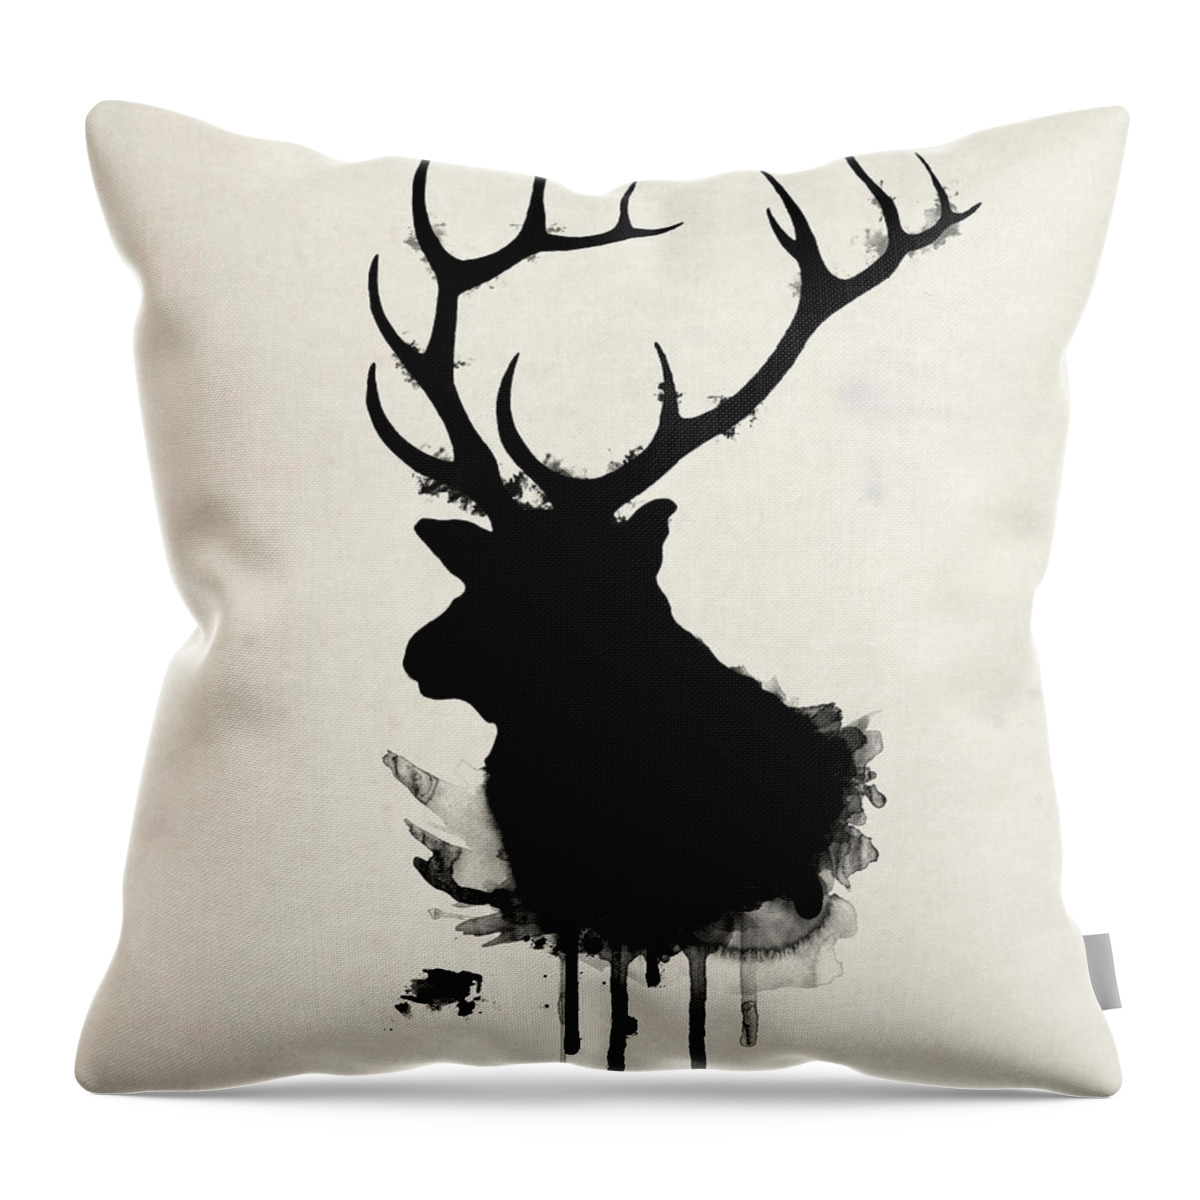 Elk Throw Pillow featuring the drawing Elk by Nicklas Gustafsson